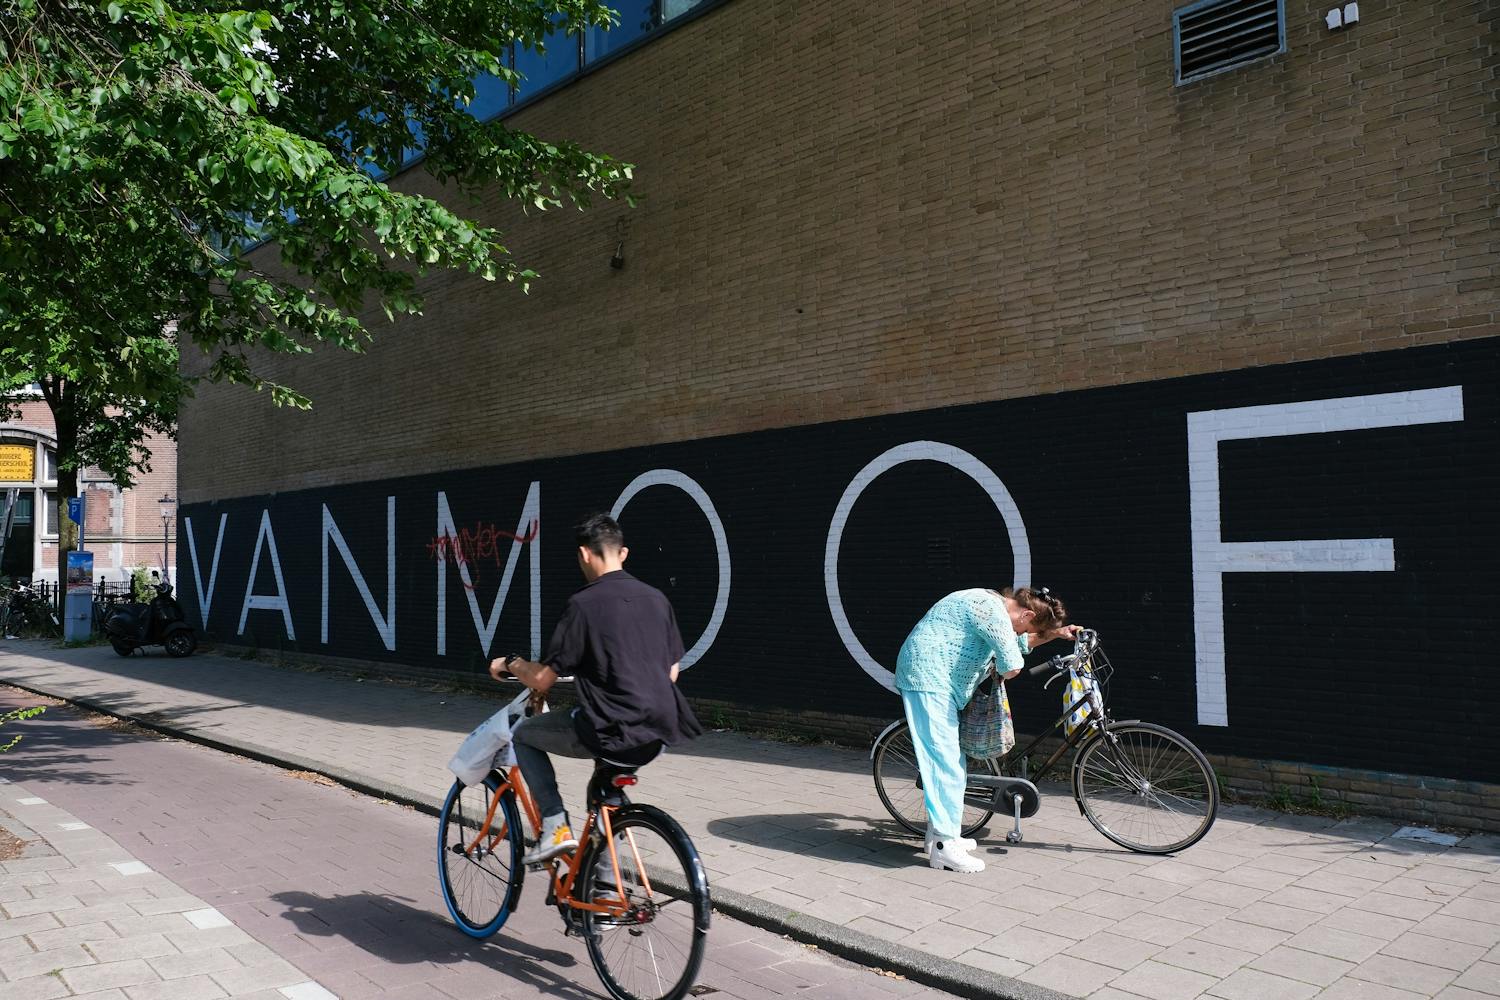 No “soft landing” for VanMoof, but for economy